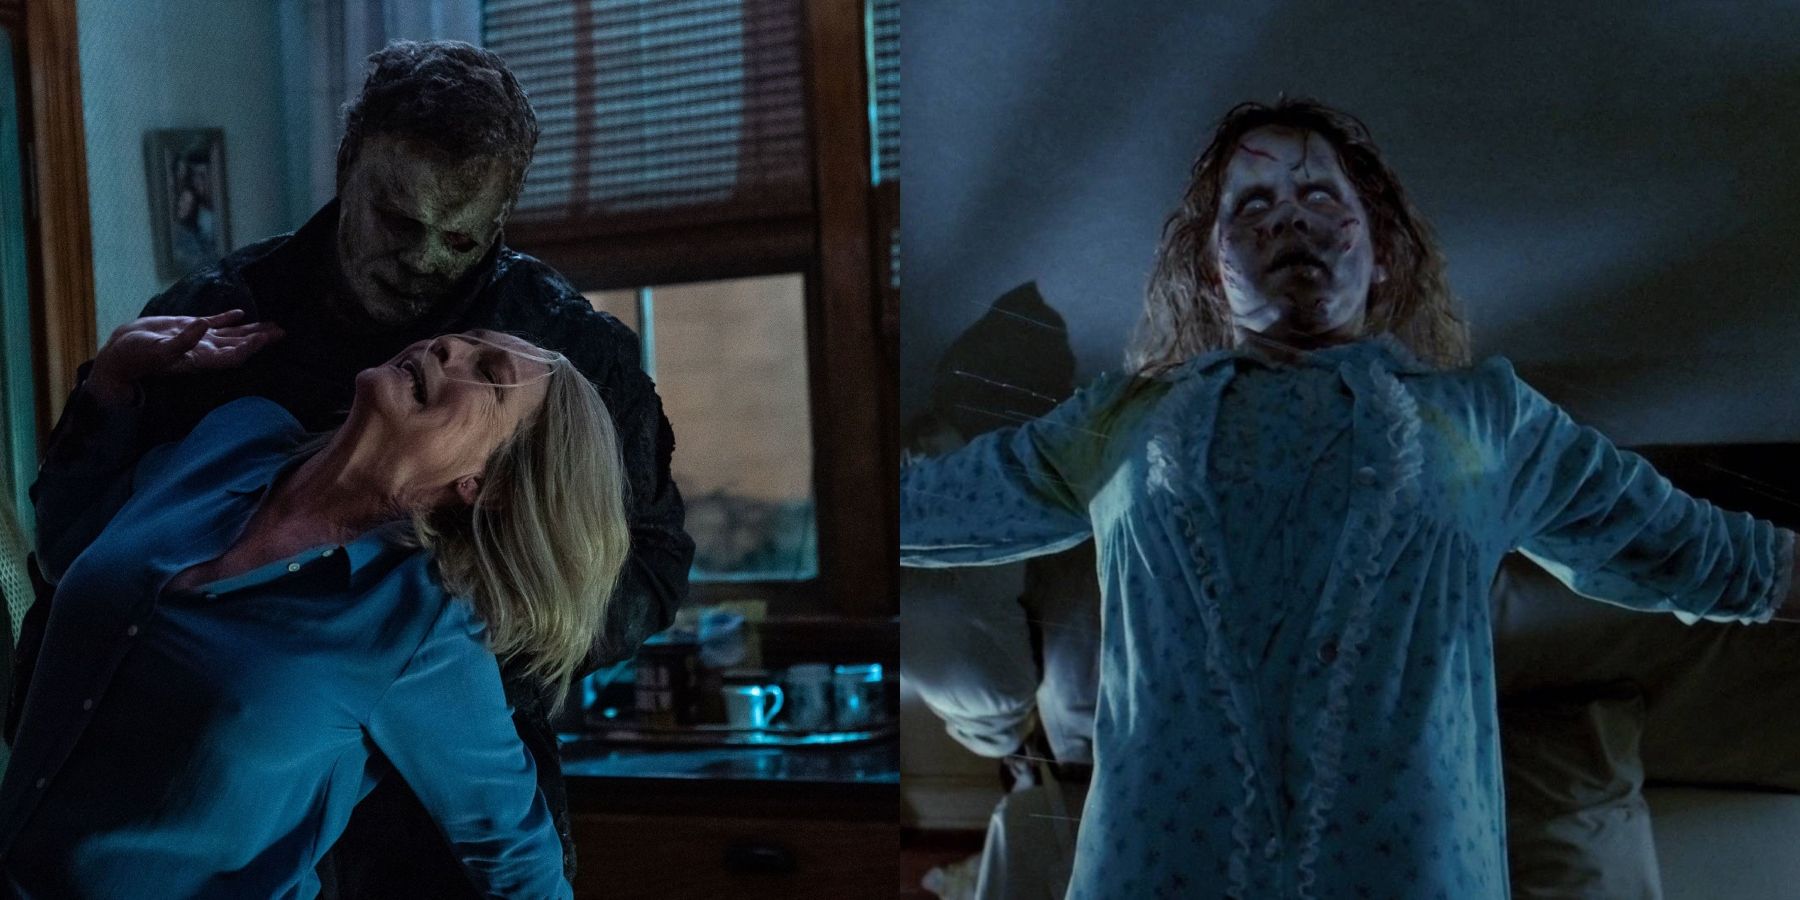 Split image of Laurie Strode and Michael Myers in Halloween Ends and Regan MacNeil in The Exorcist